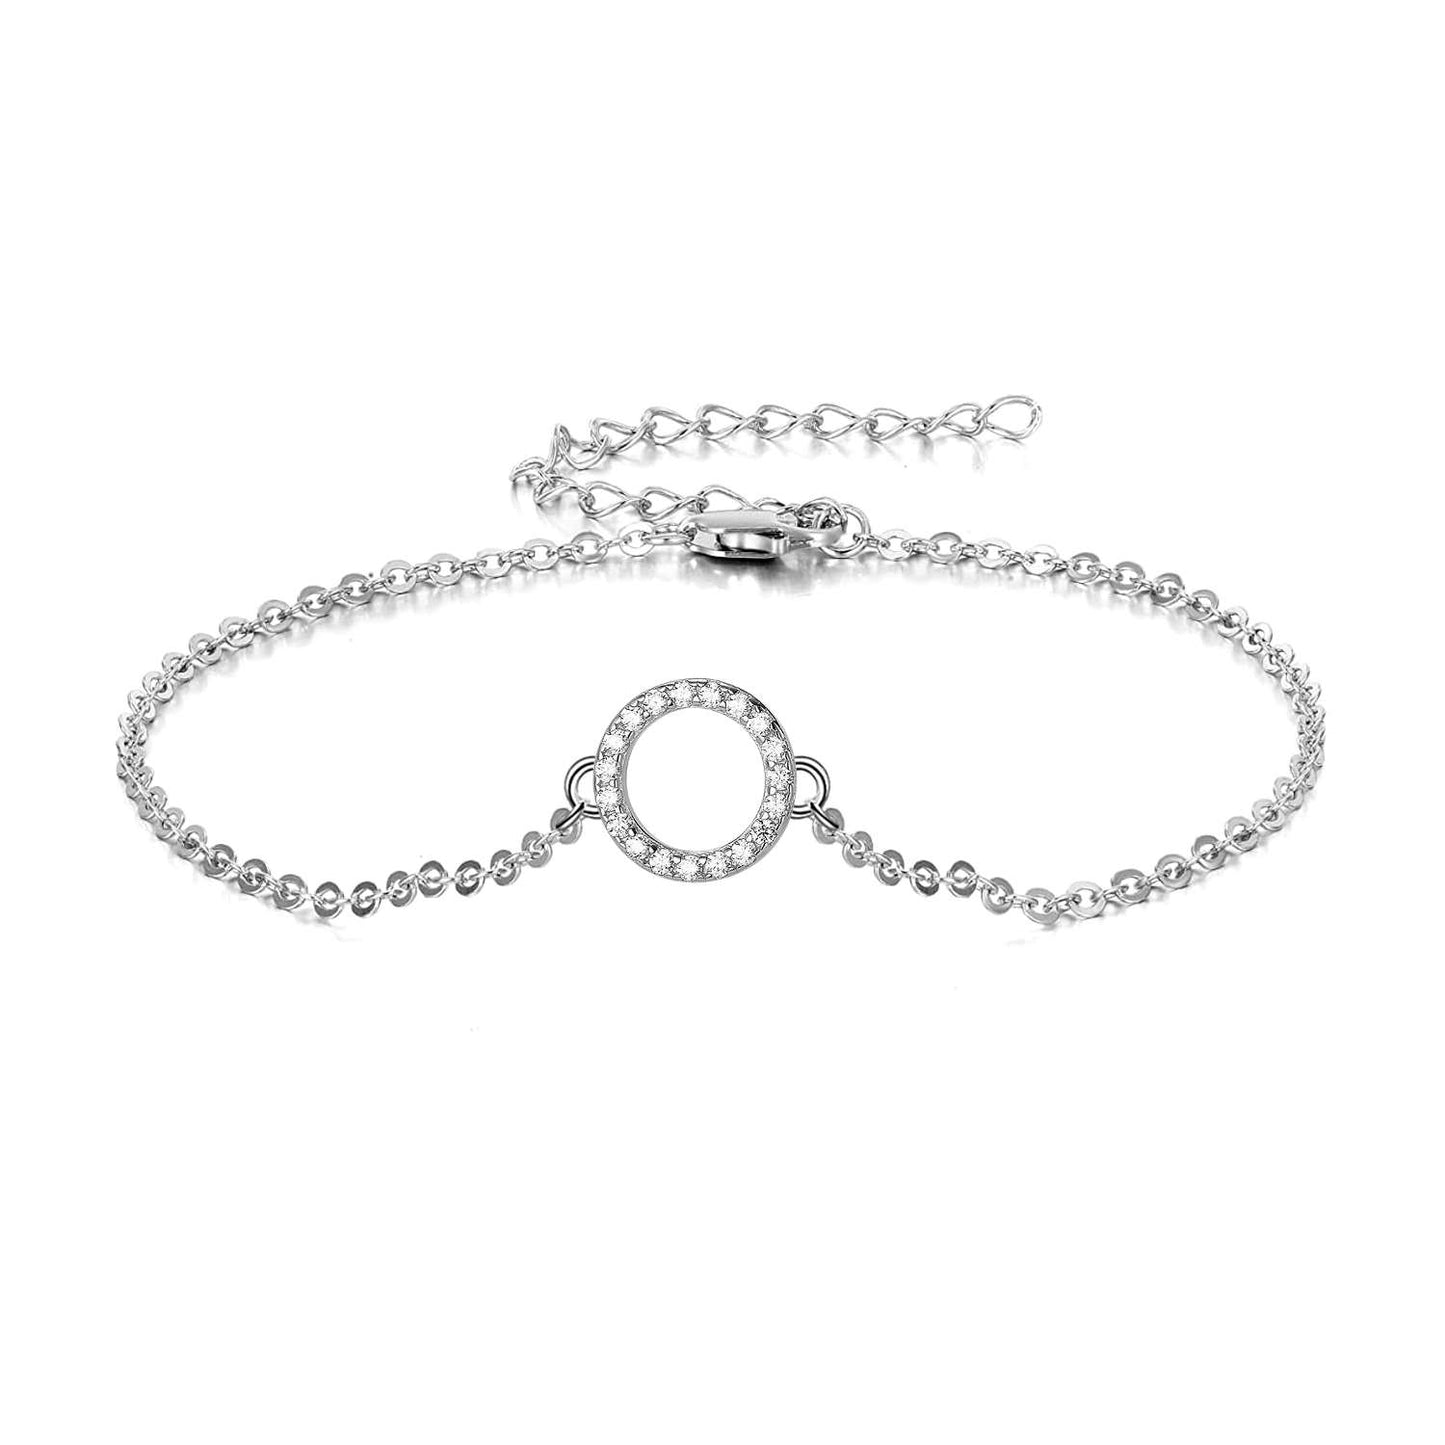 Circle Bracelet in 92.5 Silver studded with Swiss Zirconia - Circle of Life Celebrity Bracelet - Unity, Wholeness and Completeness